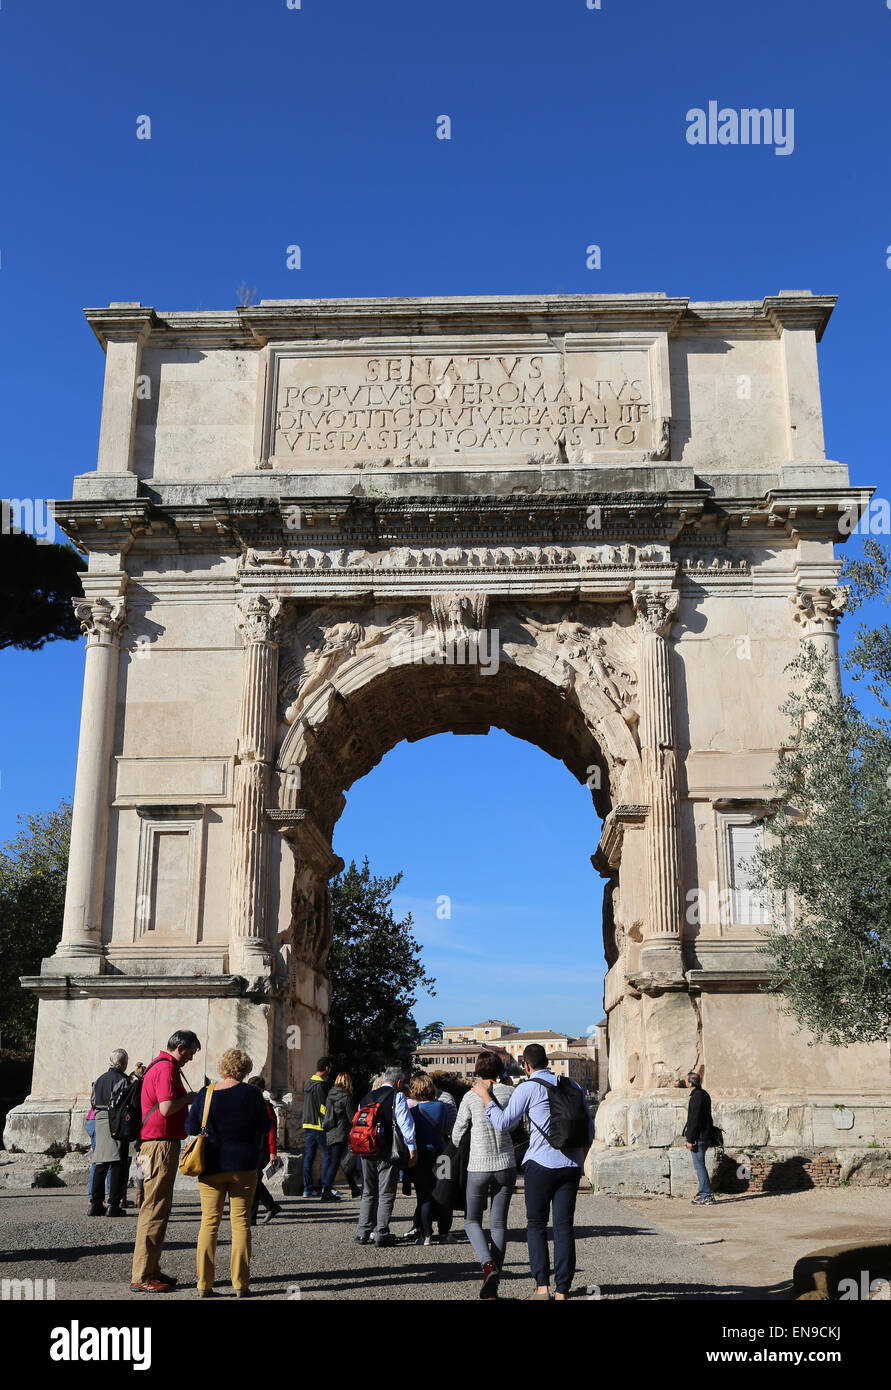 Italy. Rome. Arch of Titus. Constructed in 82 AD by the emperor Domitian to commemorate Titus' victories. Stock Photo